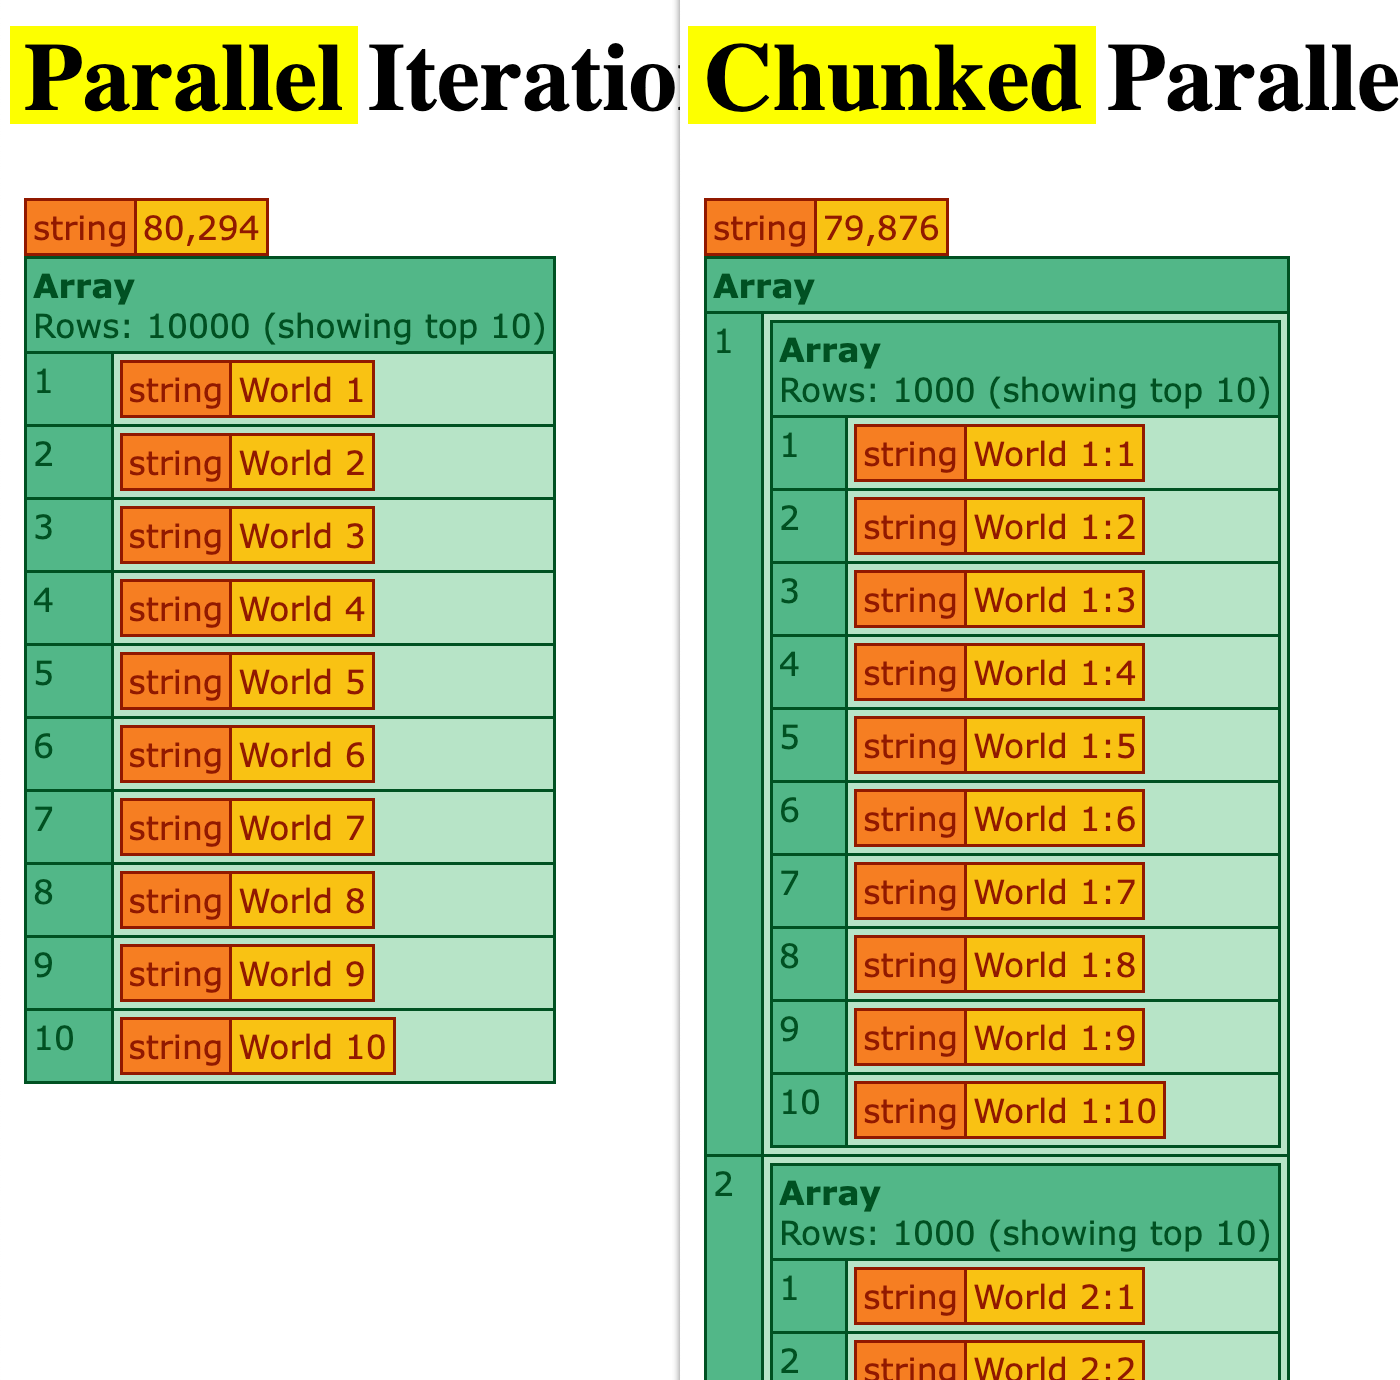 Screenshots of the two tests showing that the plain parallel iteration took about 80 seconds to complete and the chunked parallel iteration took about 80 seconds to complete.